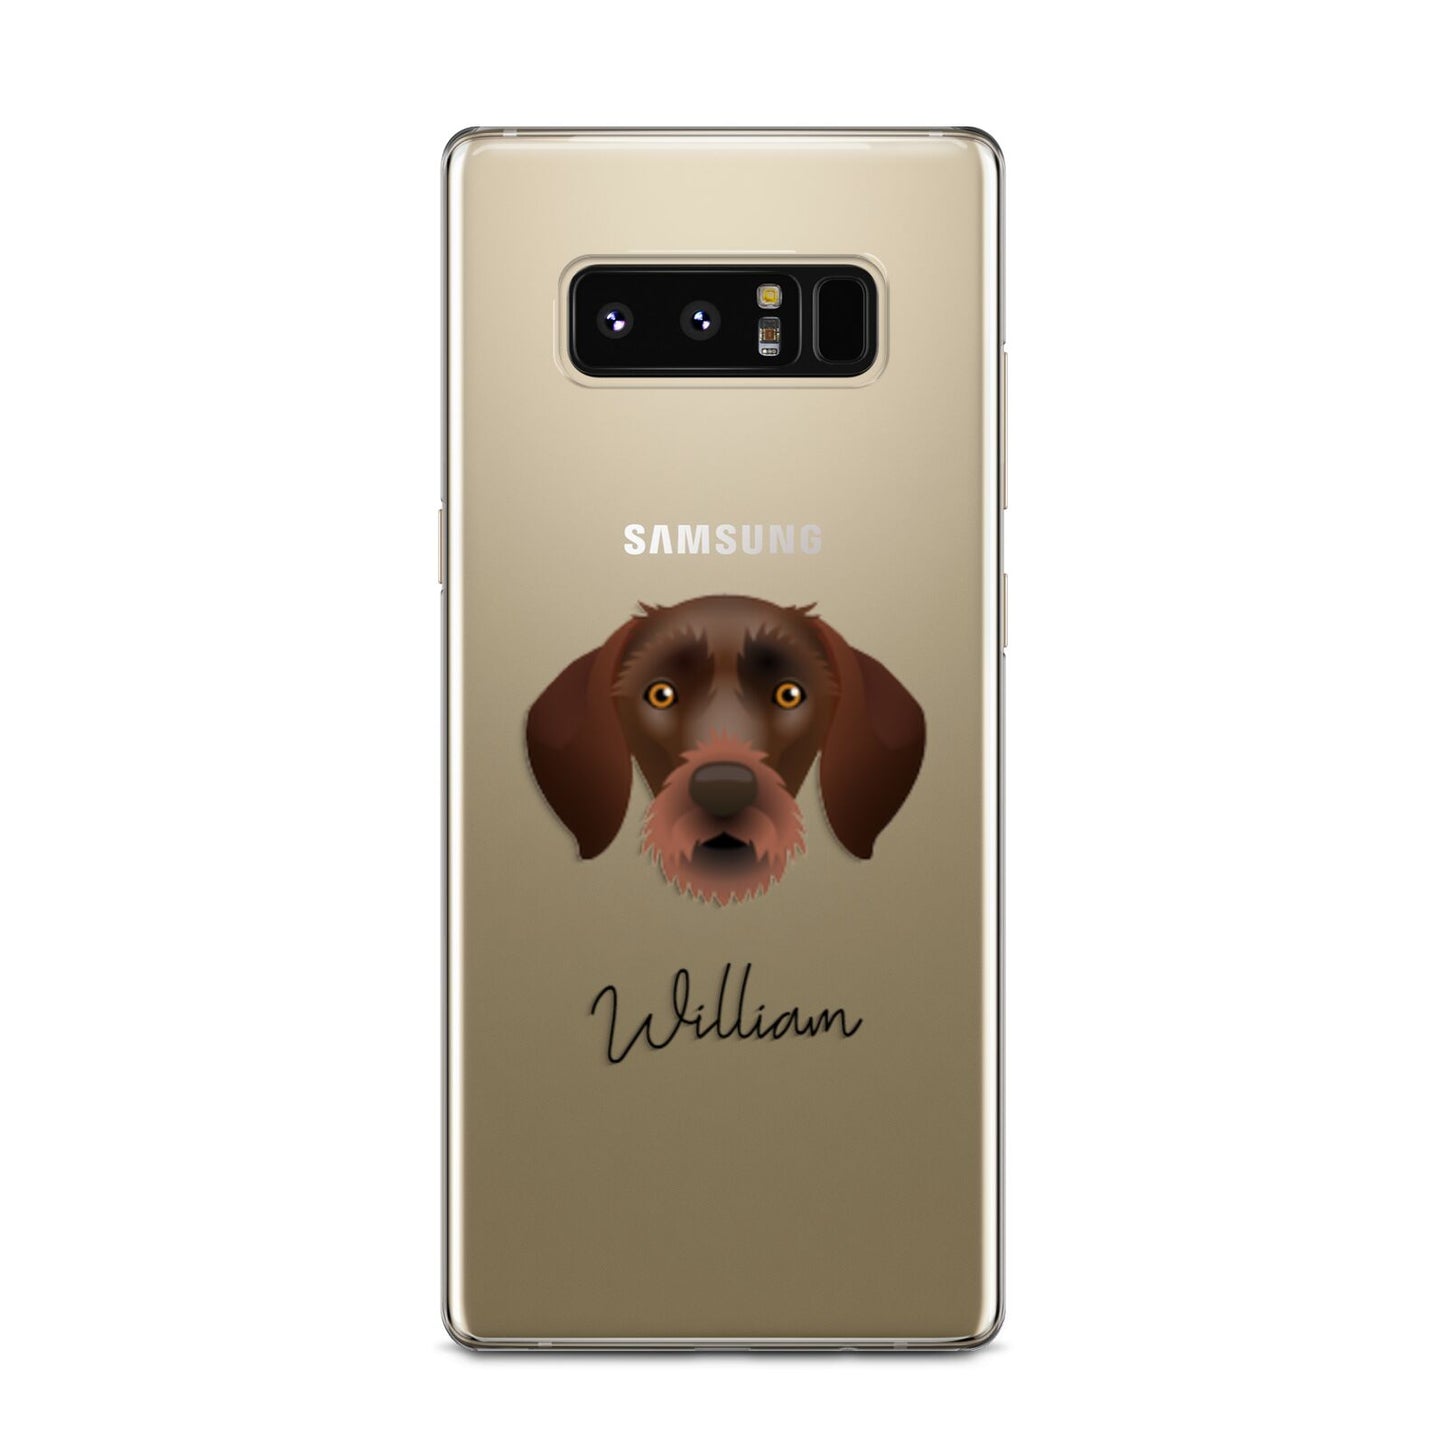 German Wirehaired Pointer Personalised Samsung Galaxy Note 8 Case